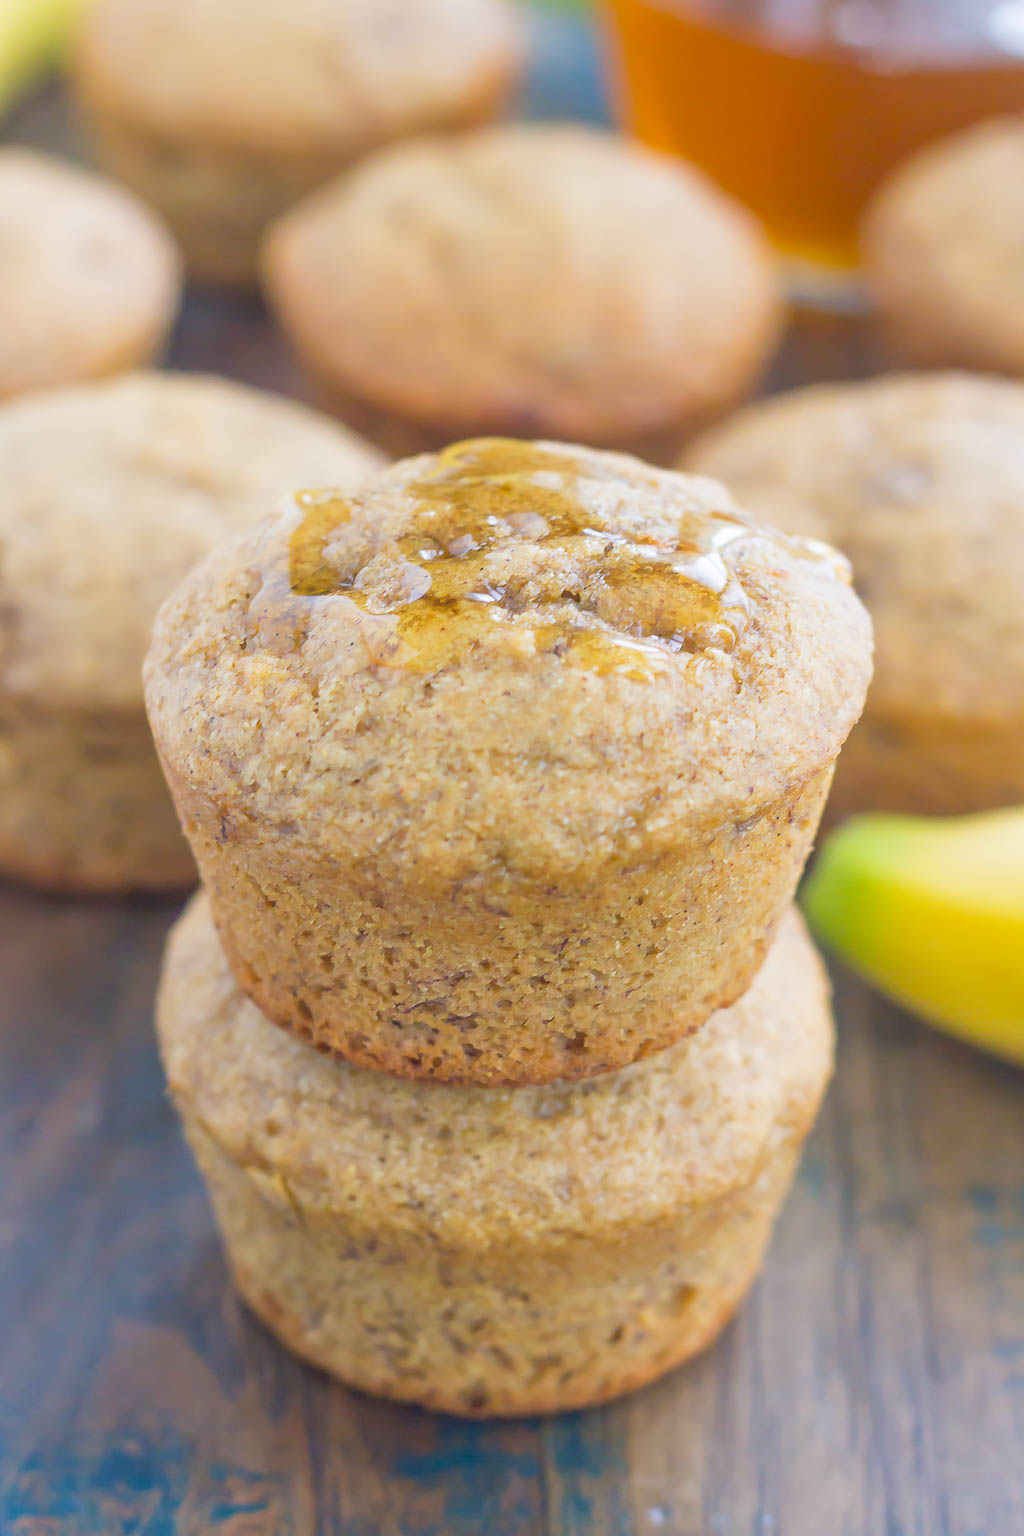 These Healthier Banana Honey Muffins are a simple, one-bowl breakfast or snack. Packed with sweet bananas and a touch of honey, these muffins bake up soft, moist, and on the healthier side!